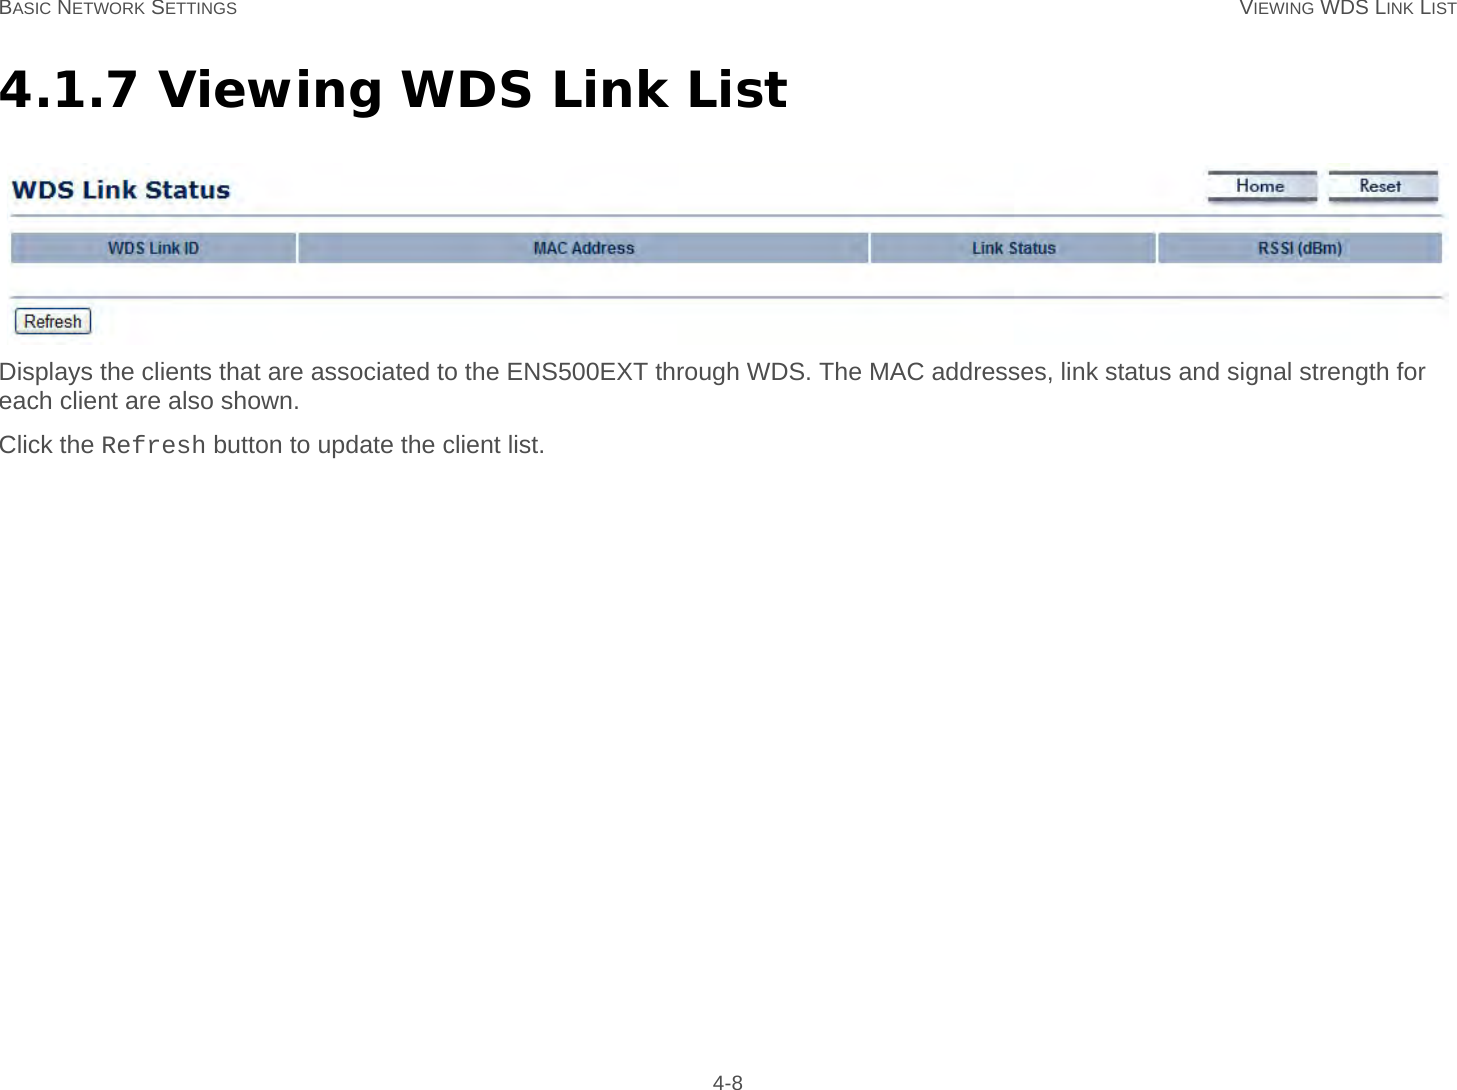 BASIC NETWORK SETTINGS VIEWING WDS LINK LIST 4-84.1.7 Viewing WDS Link ListDisplays the clients that are associated to the ENS500EXT through WDS. The MAC addresses, link status and signal strength for each client are also shown.Click the Refresh button to update the client list.